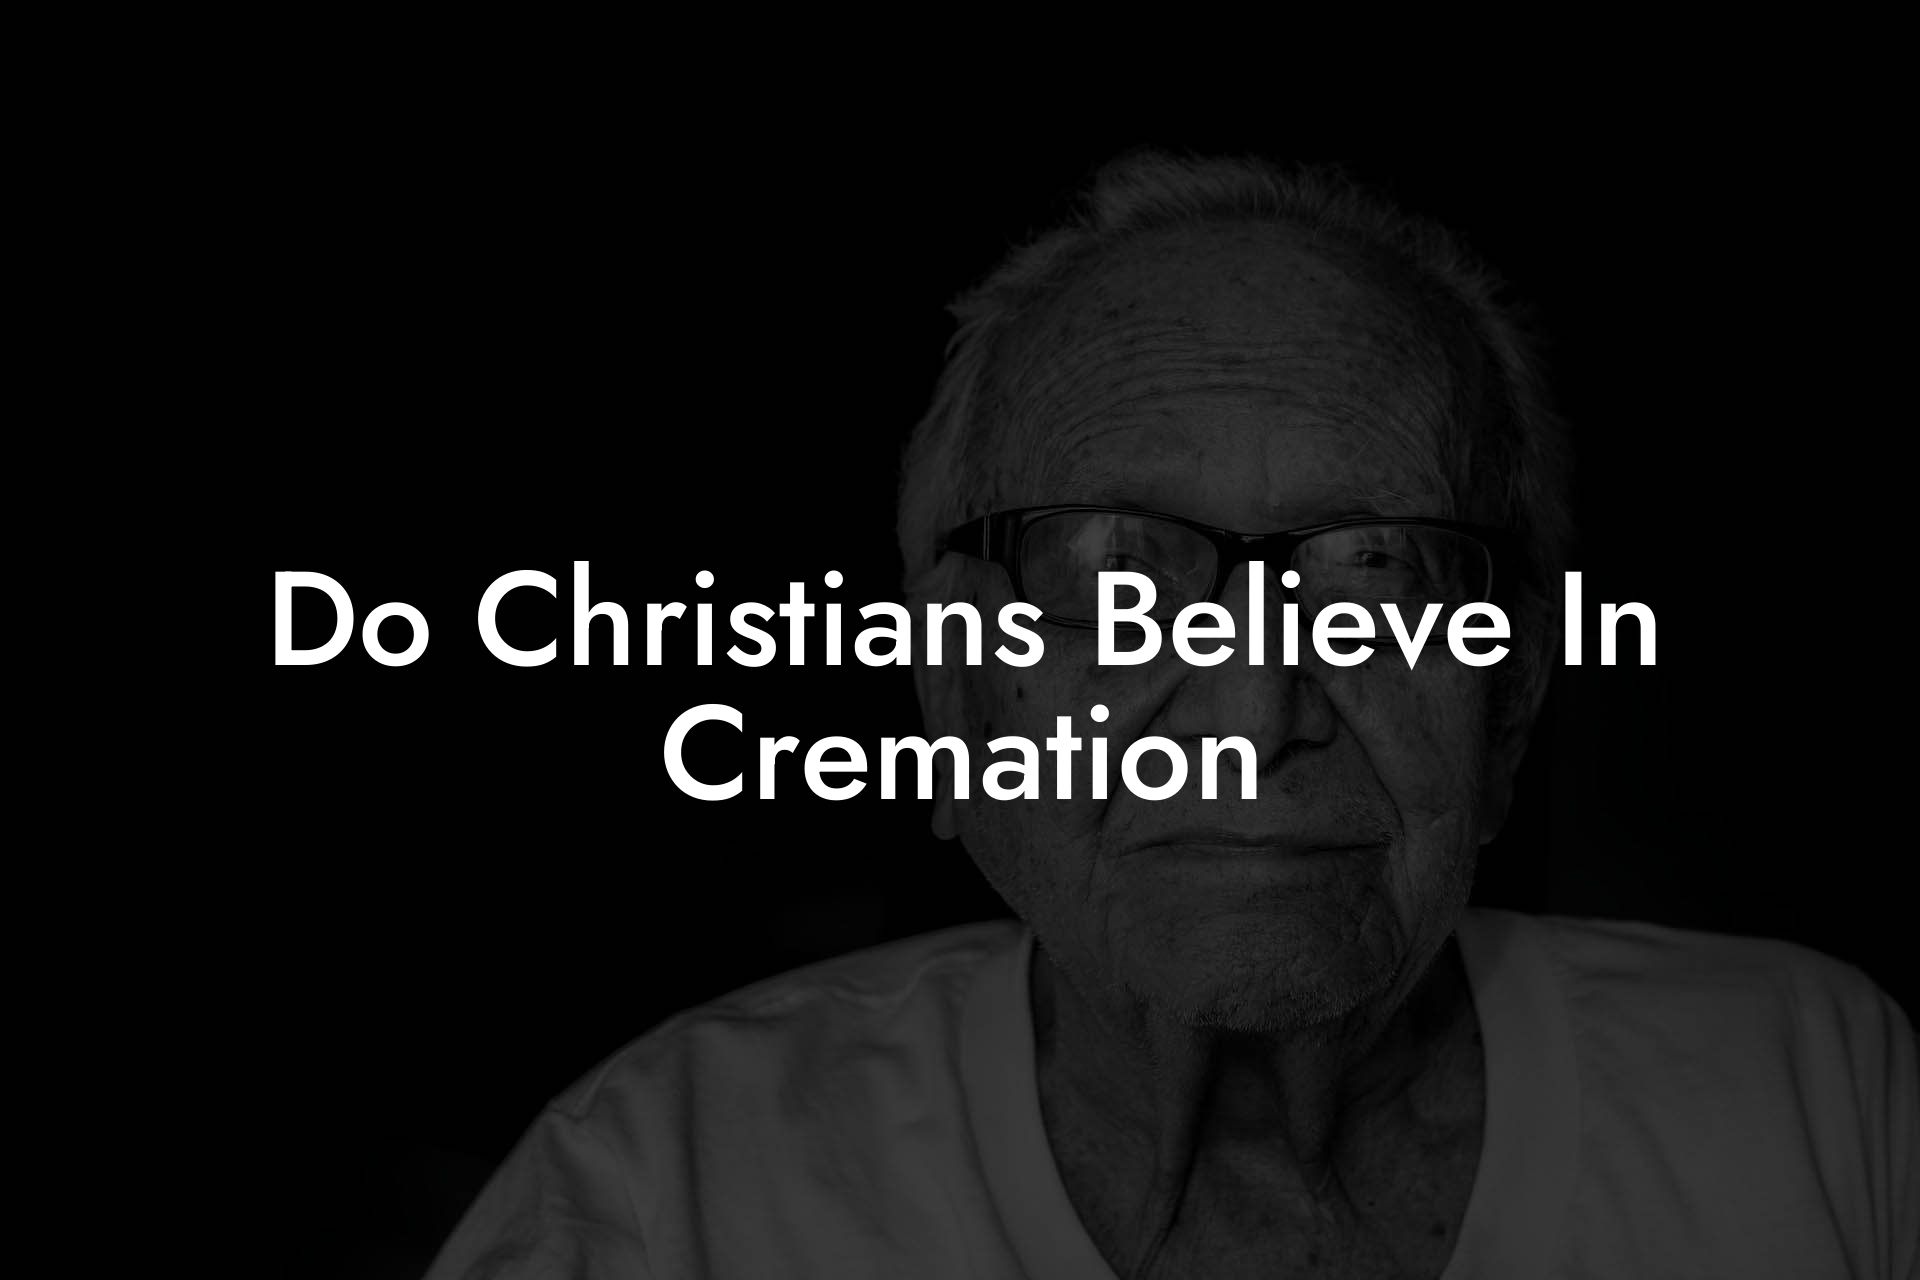 Do Christians Believe In Cremation